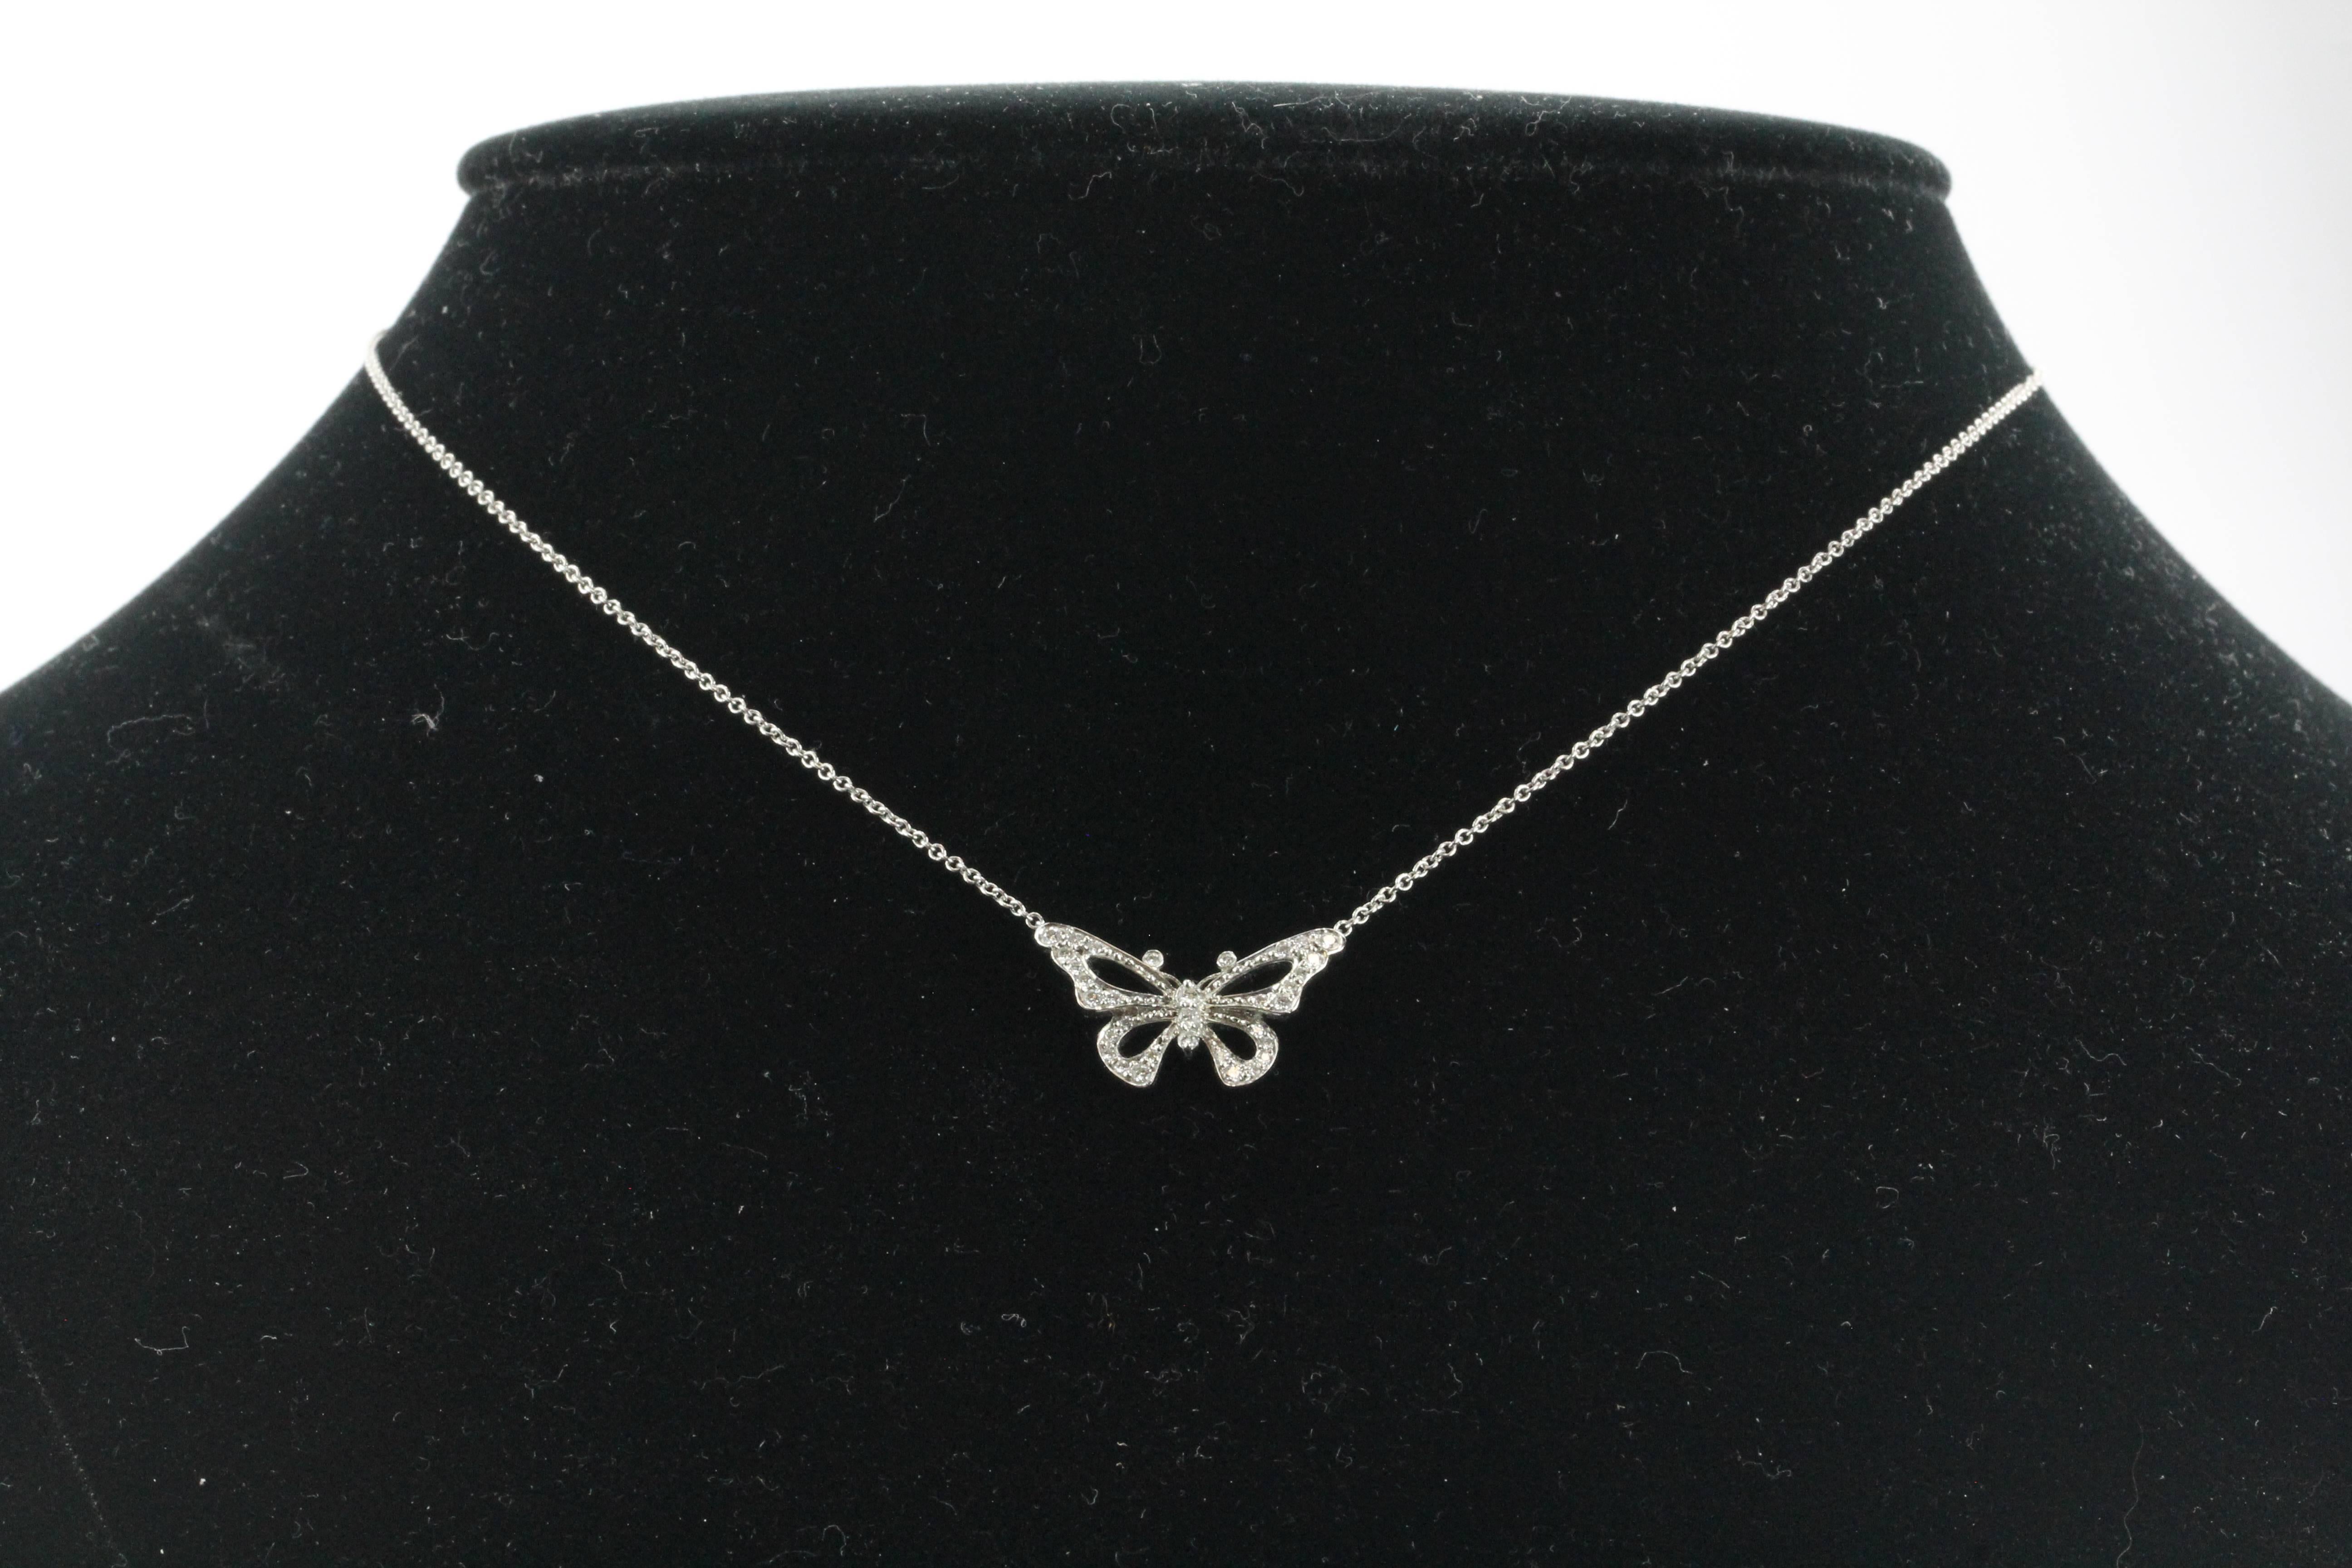 Tiffany & Co Platinum & Diamond Butterfly Pendant Necklace. The piece is in excellent estate condition and ready to wear and comes with its original Tiffany pouch. The piece is signed Tiffany & Co PT 950. It is set with .20 carats of Vs1 clarity, G